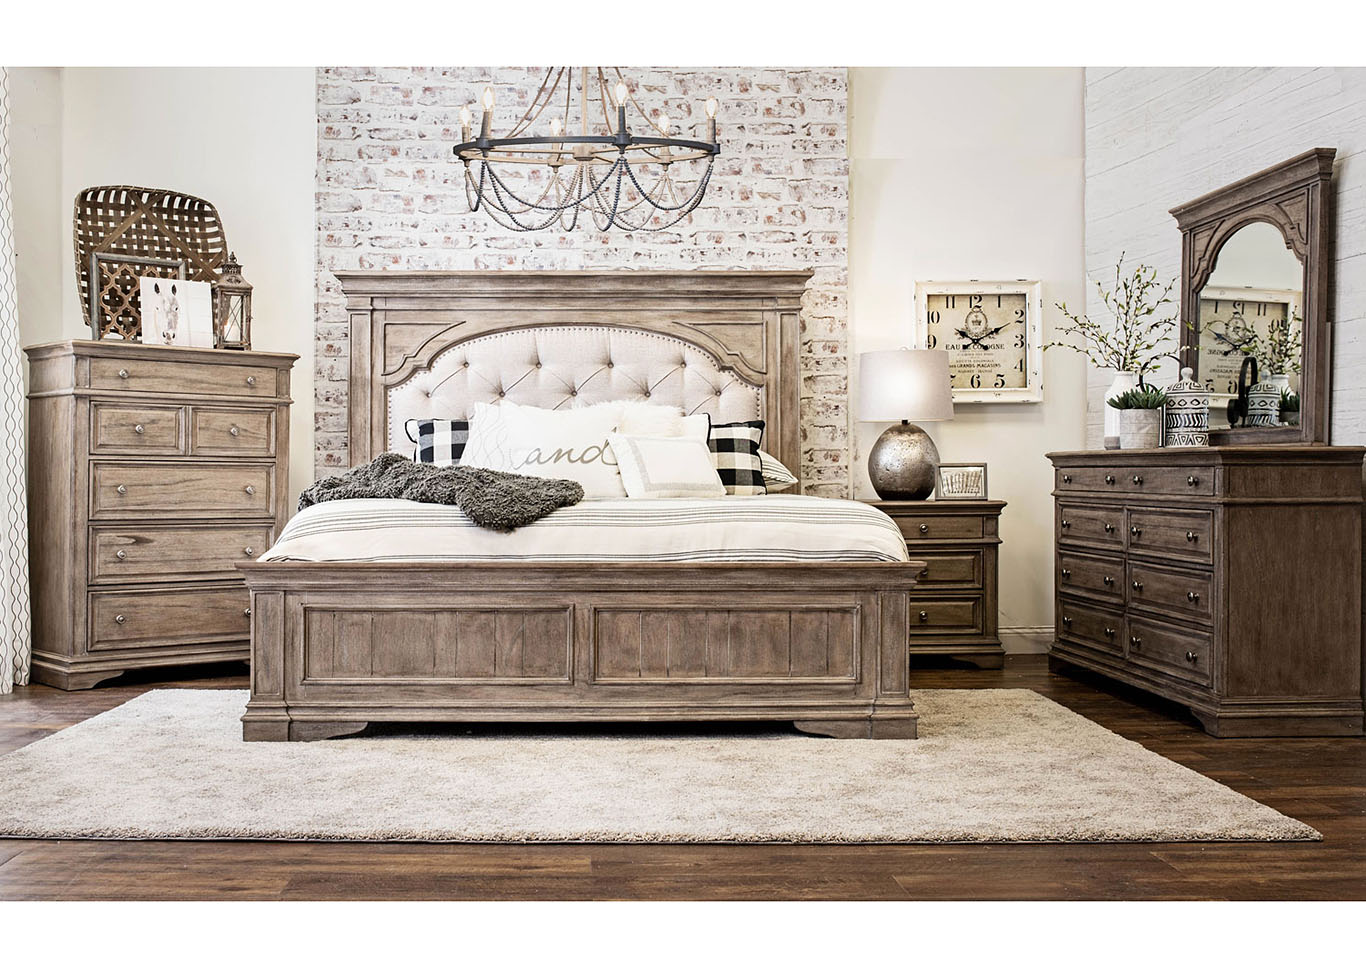 Highland Park Avenue Waxed Driftwood Panel King Bed,Steve Silver